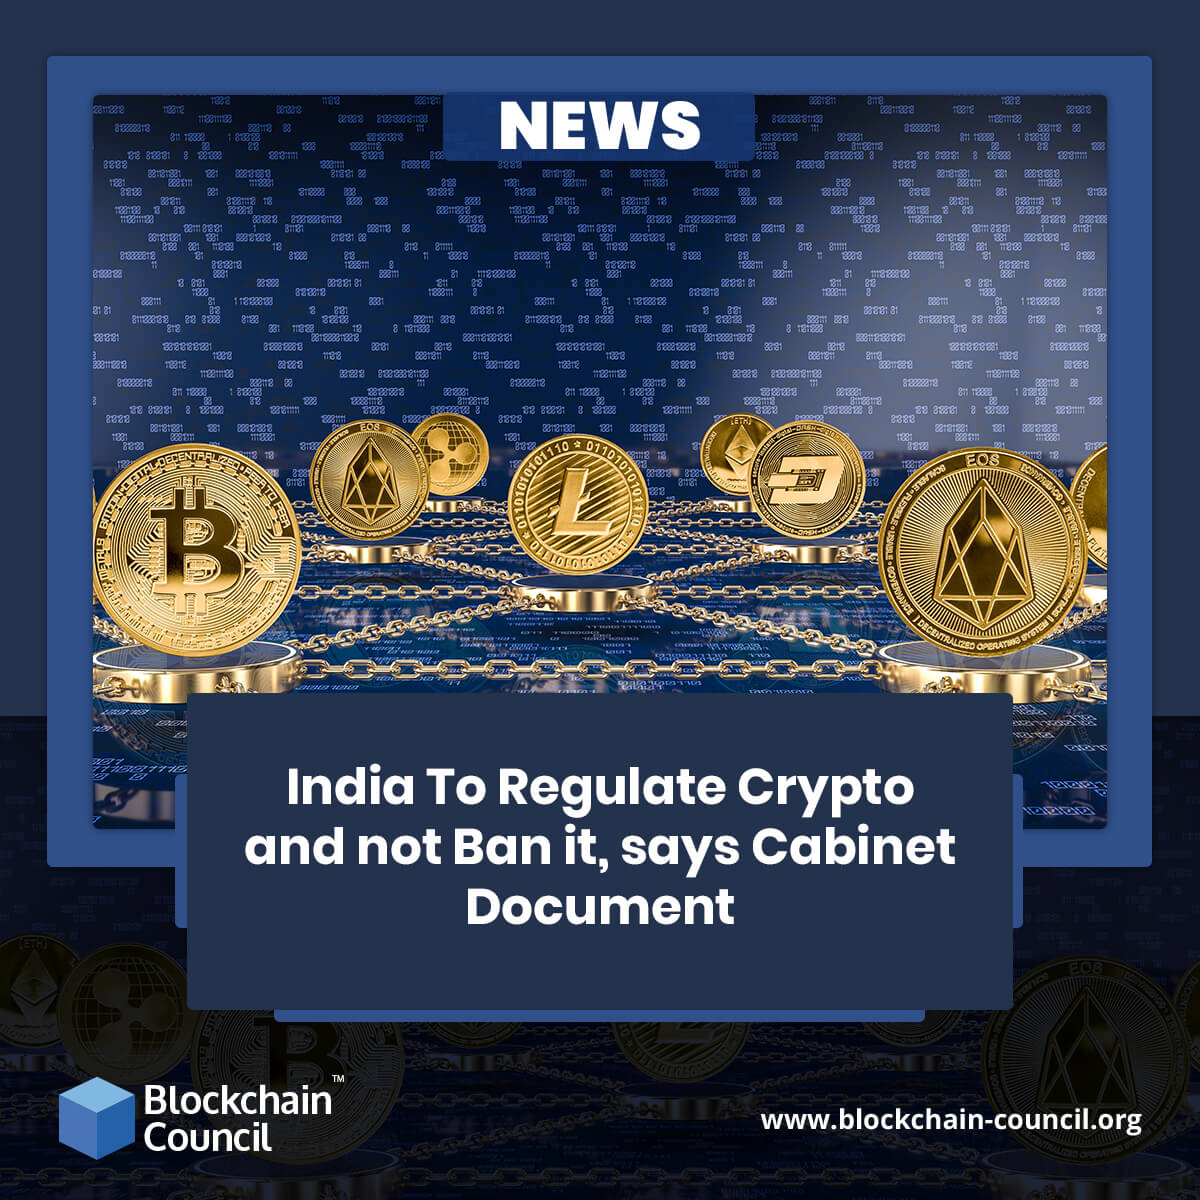 Cabinet document says India will regulate cryptocurrency instead of banning it